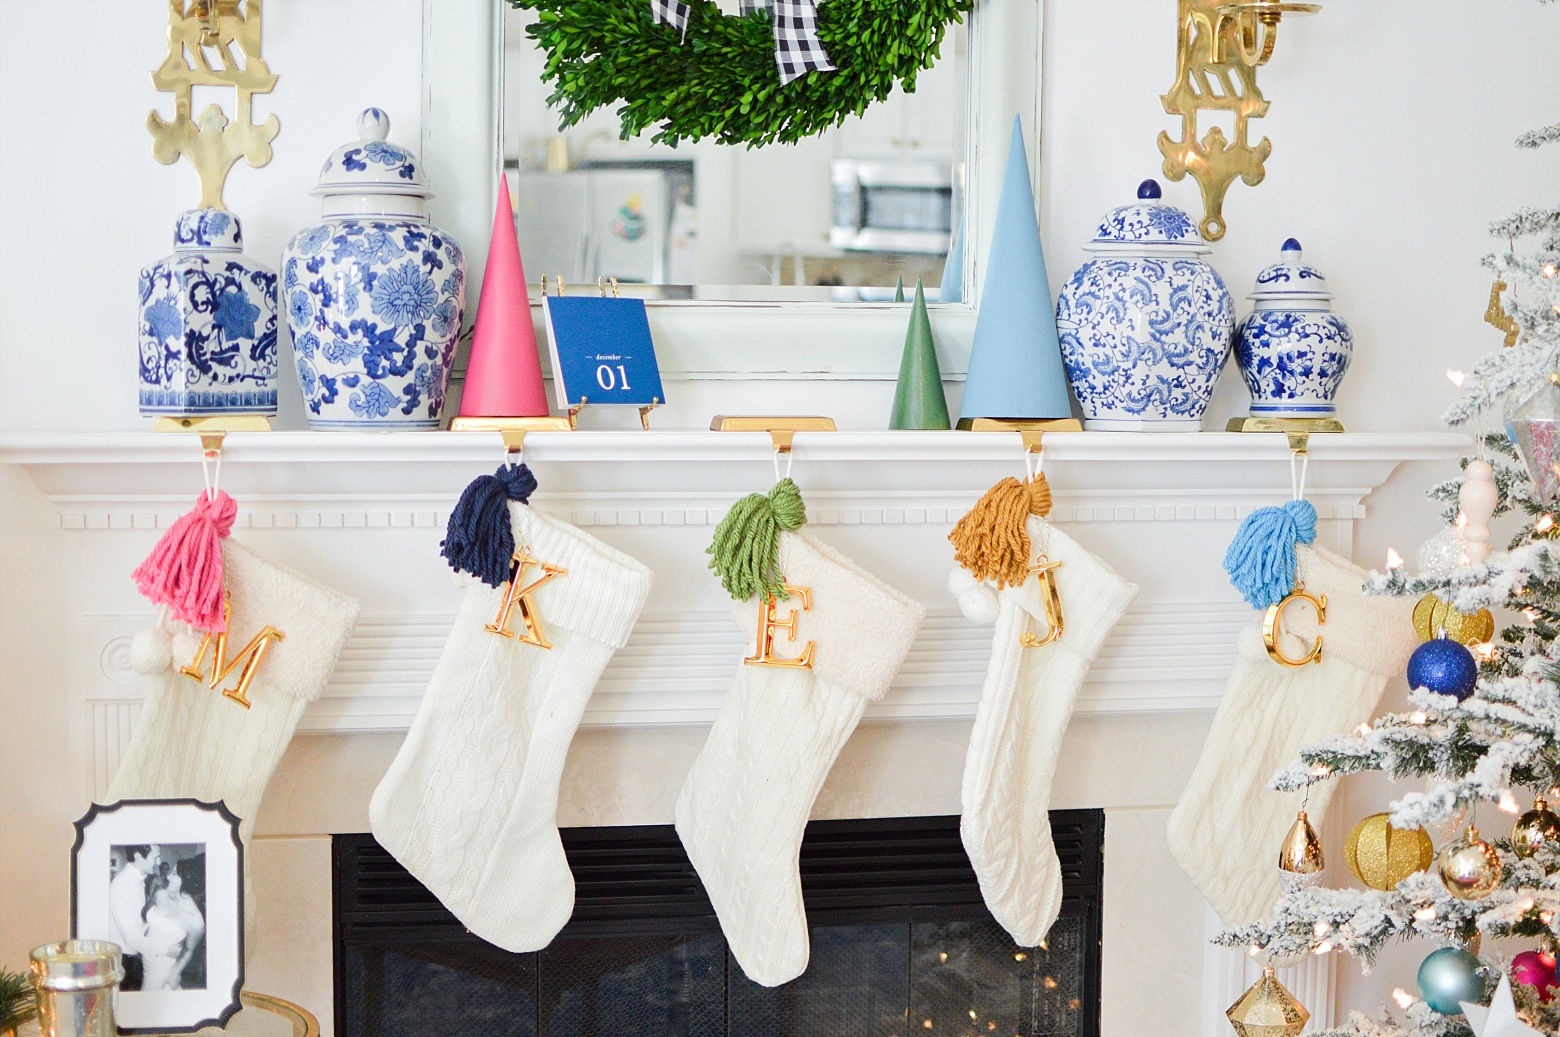 A Modern Colorful Christmas Home Tour on Megan Martin Creative, White Sweater stockings, DIY tassels, Christmas mantel decorations, chinoiserie holiday